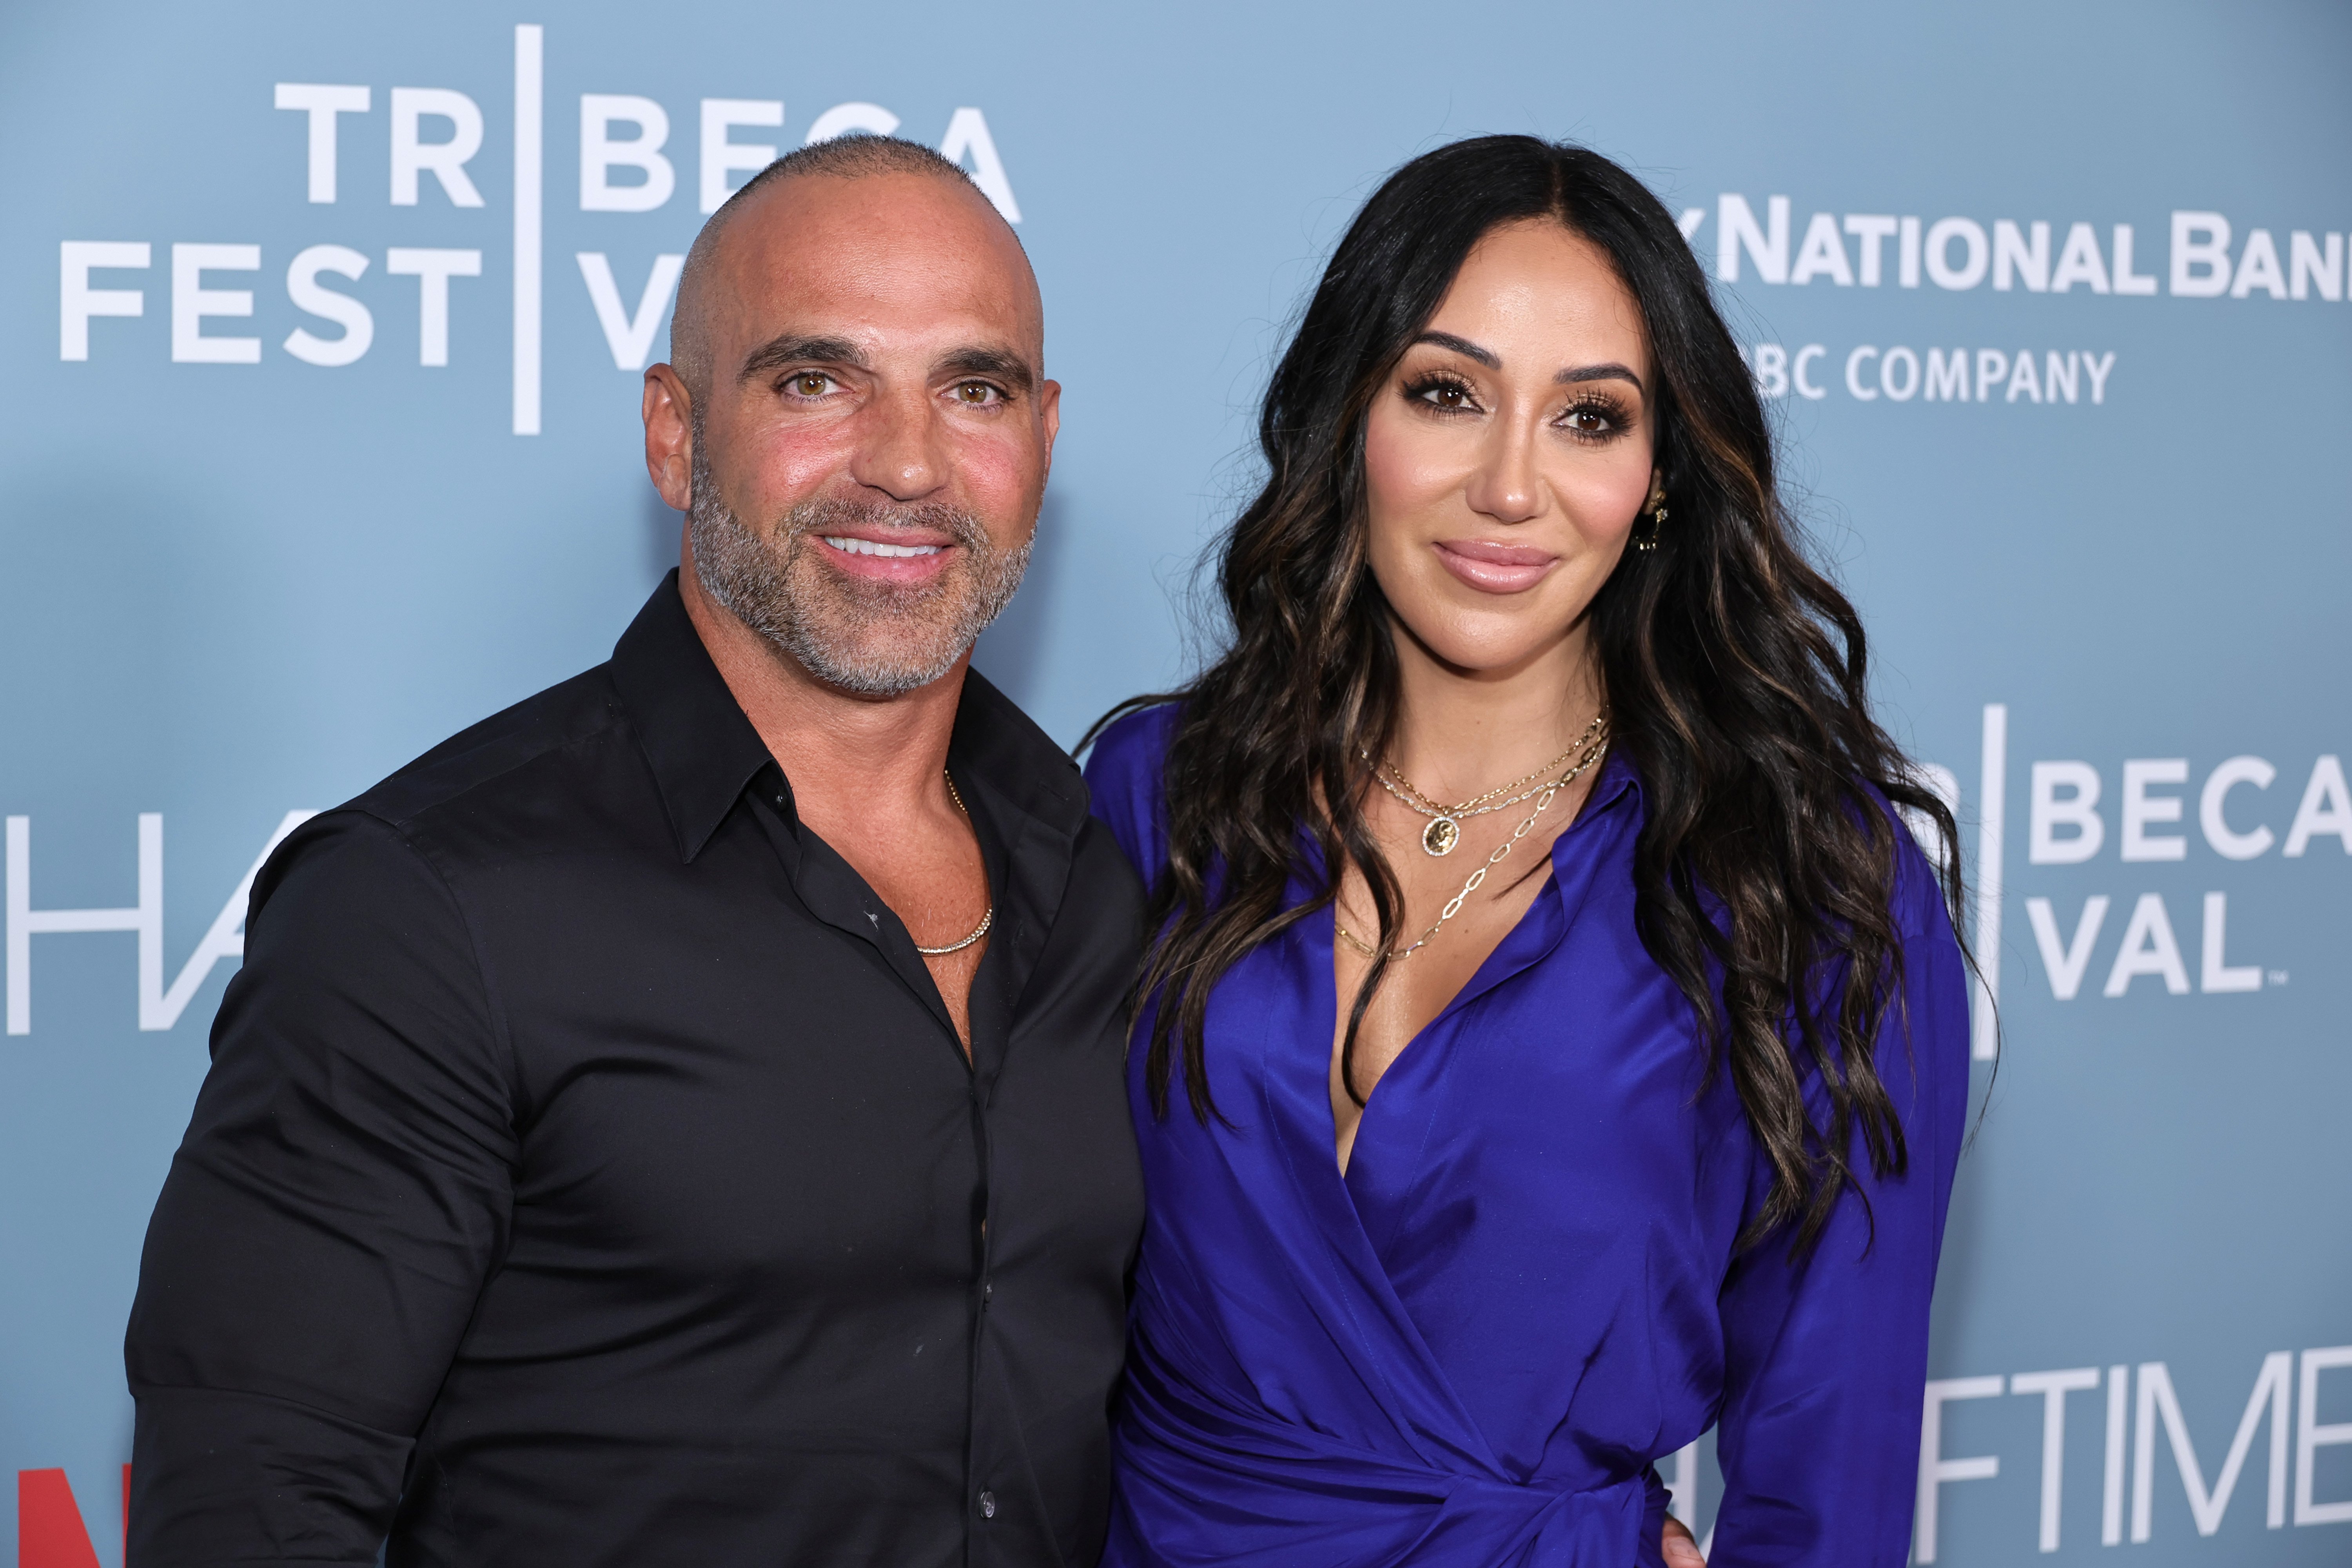 Joe Gorga and Melissa Gorga attend the "Halftime" Premiere during the Tribeca Festival Opening Night on June 08, 2022 in New York City. | Source: Getty Images